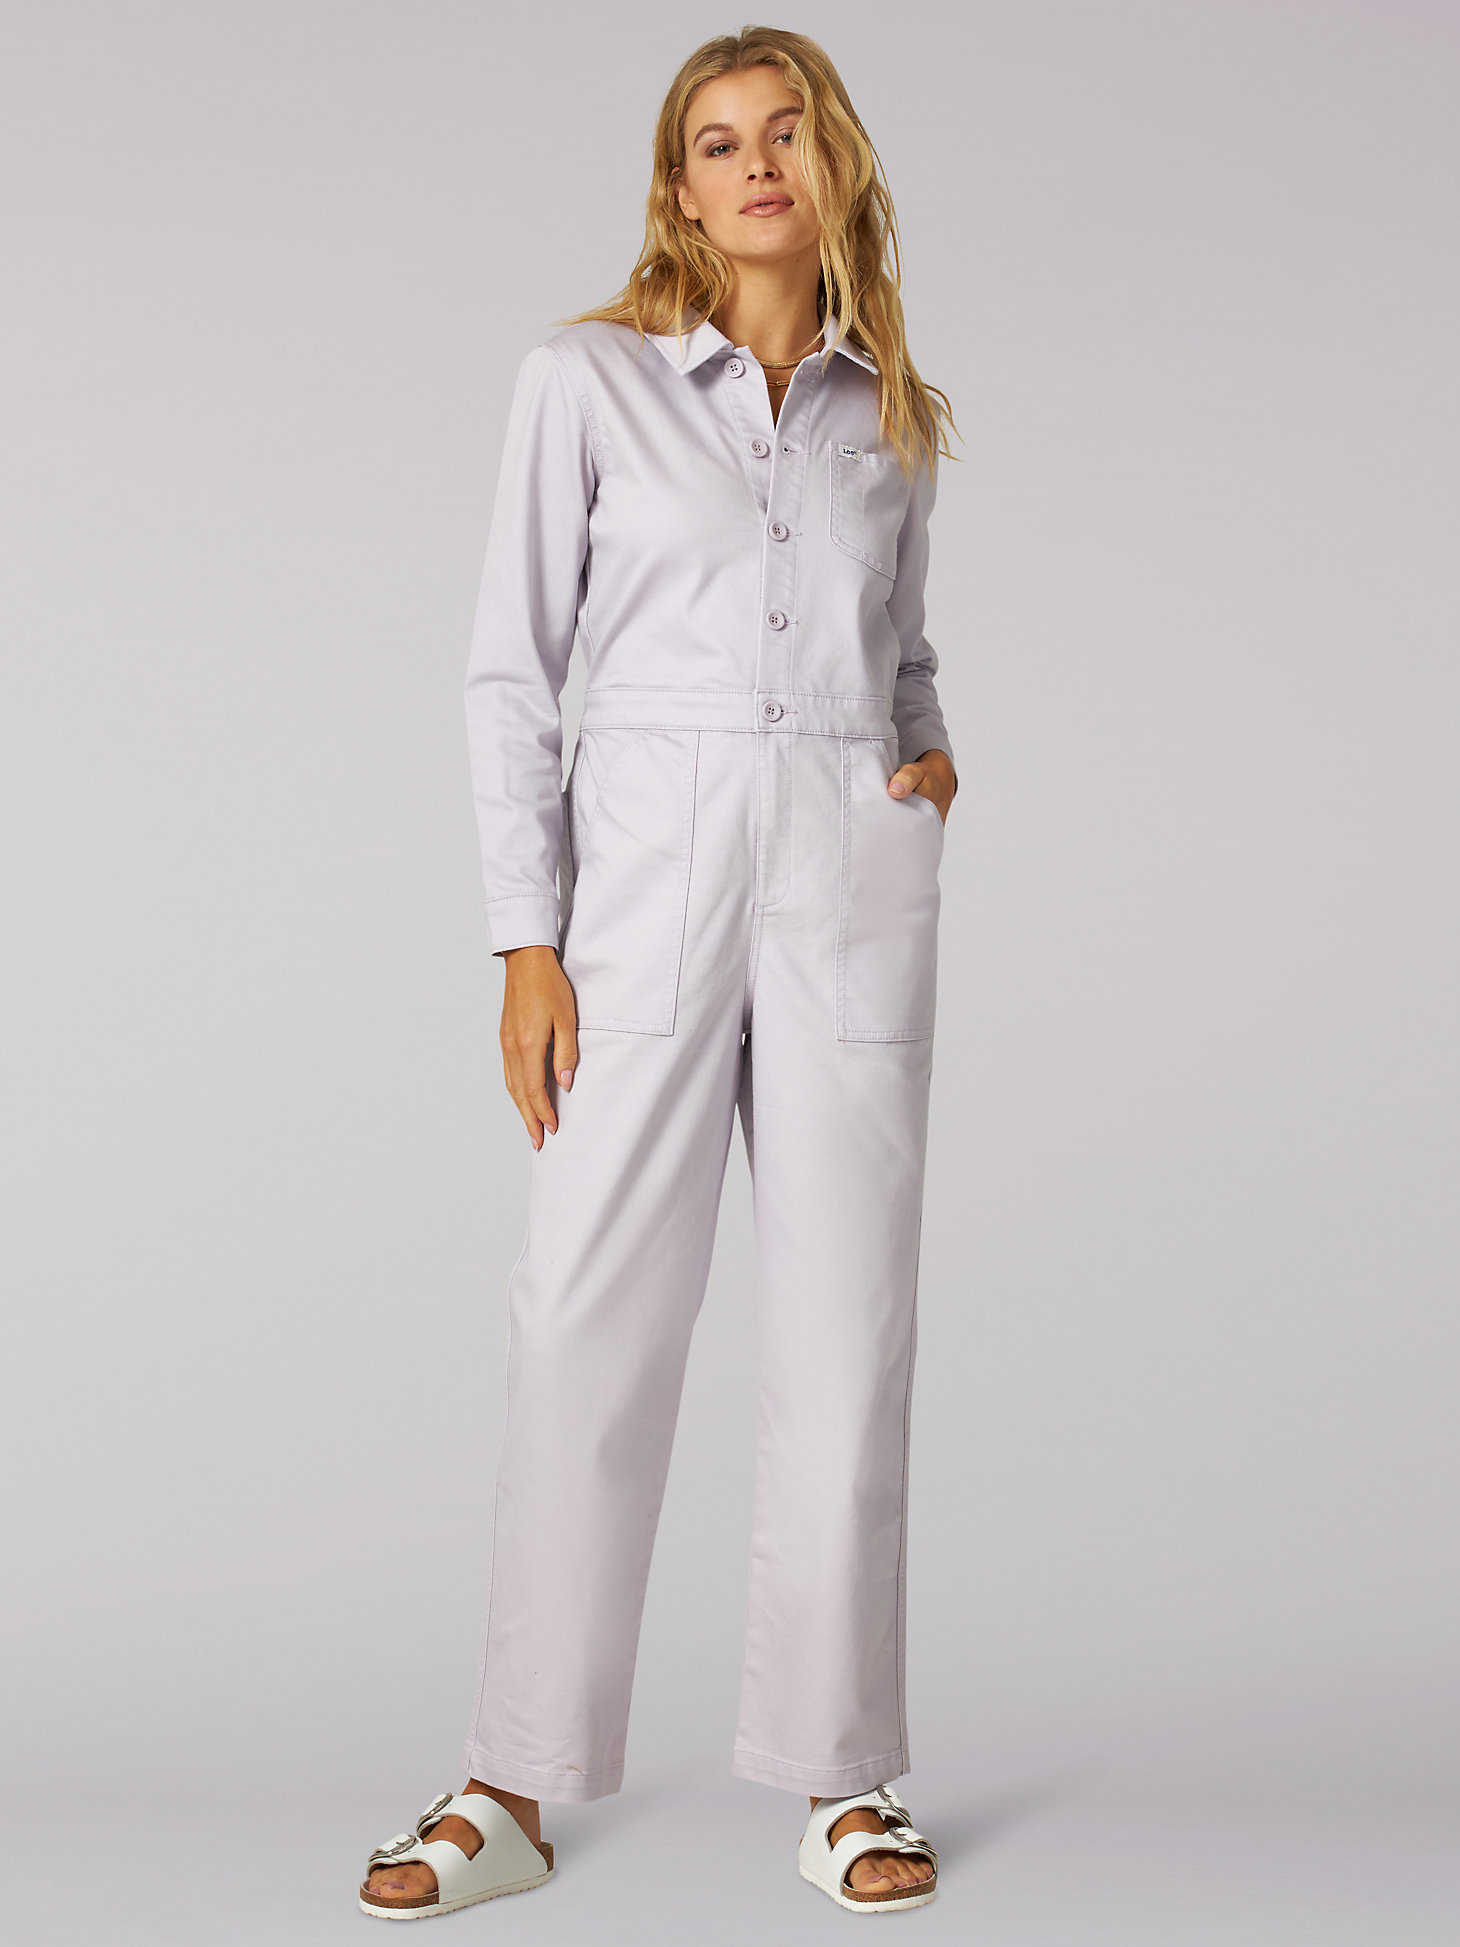 Women's Heritage Chetopa Service Union-Alls™ in Misty Lilac main view